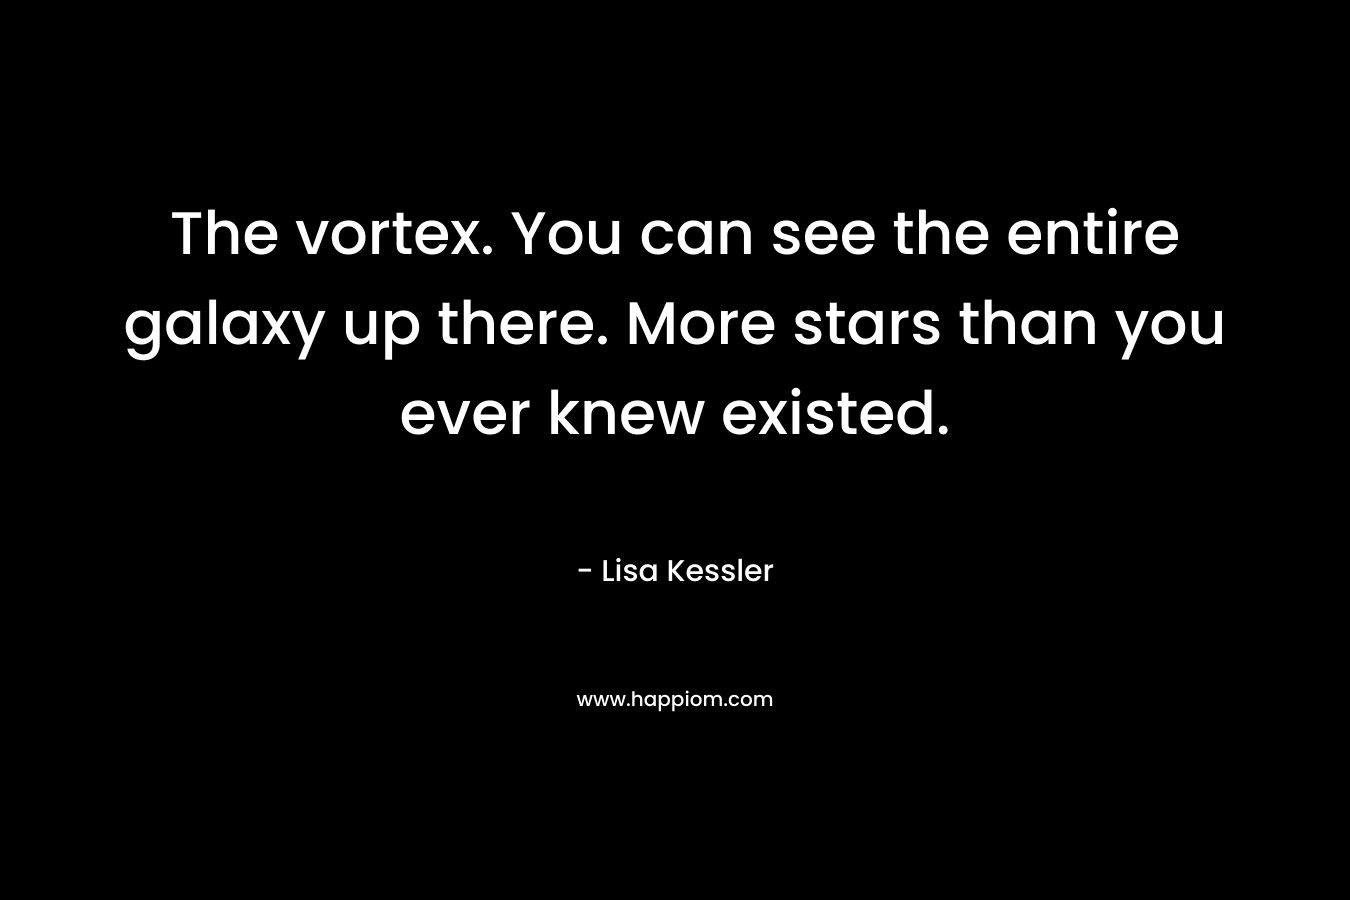 The vortex. You can see the entire galaxy up there. More stars than you ever knew existed. – Lisa Kessler